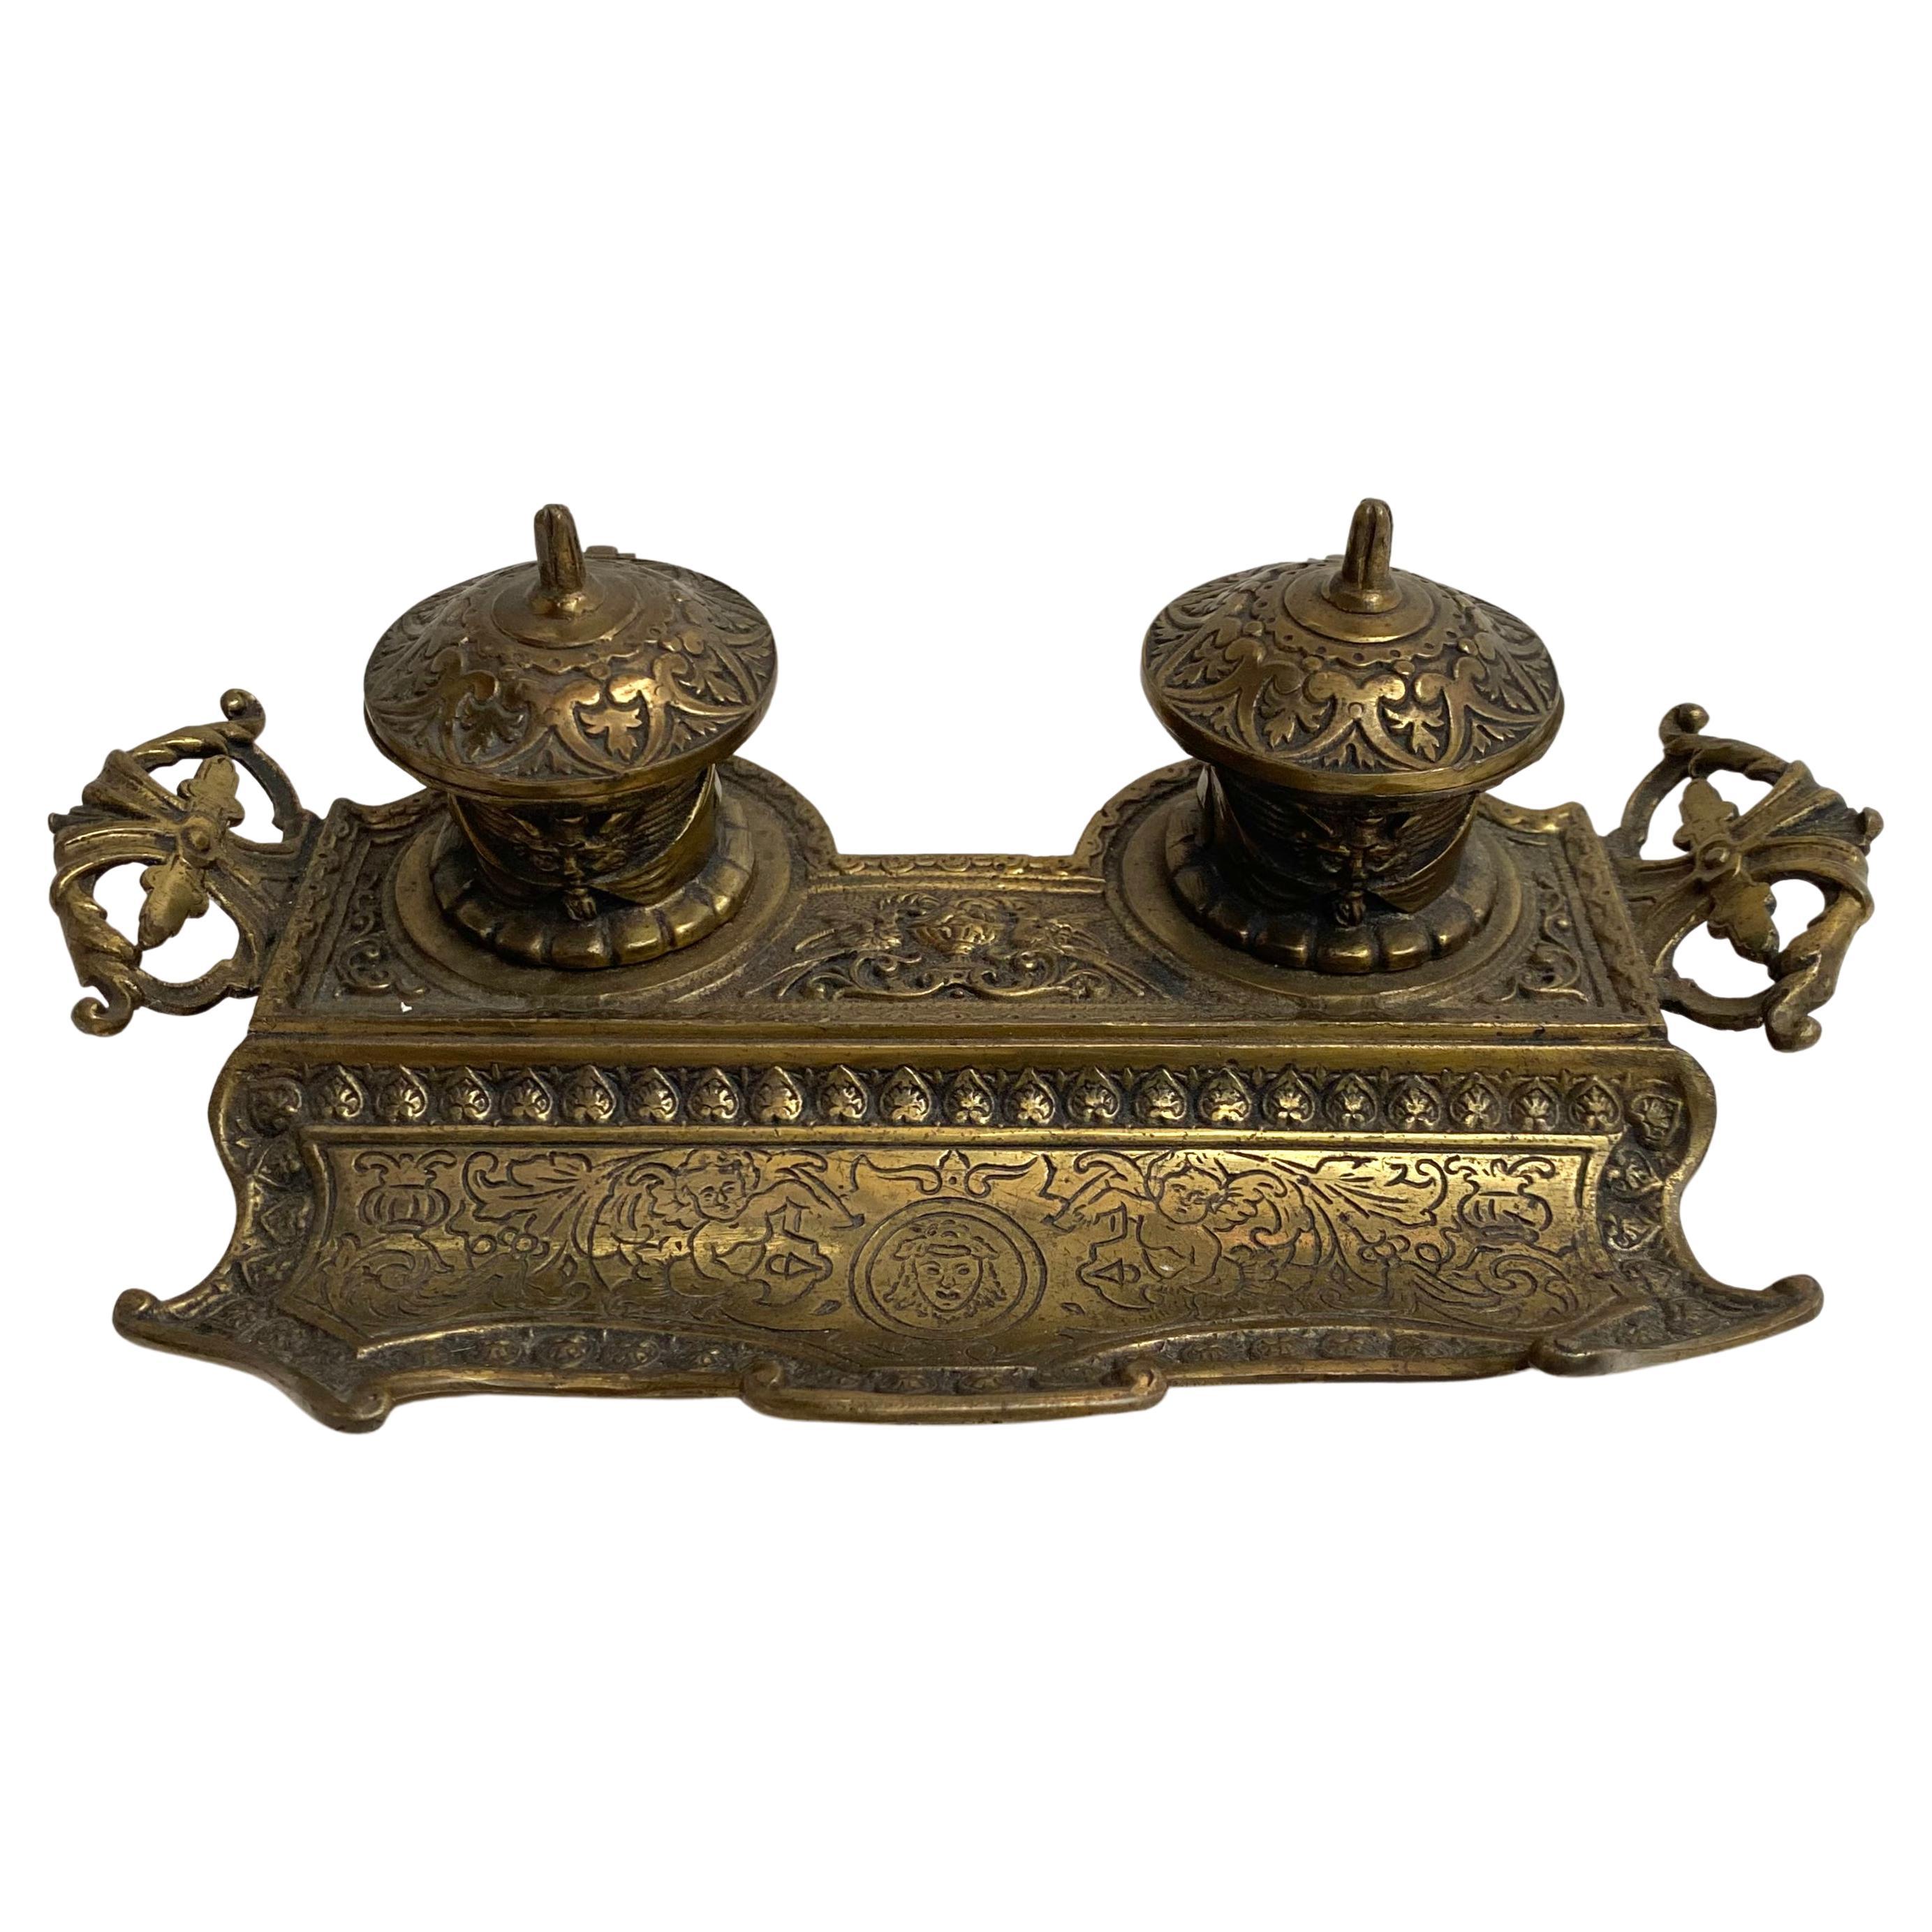 Unique Antique Cast Brass Double Inkwell from France, Early 1900s